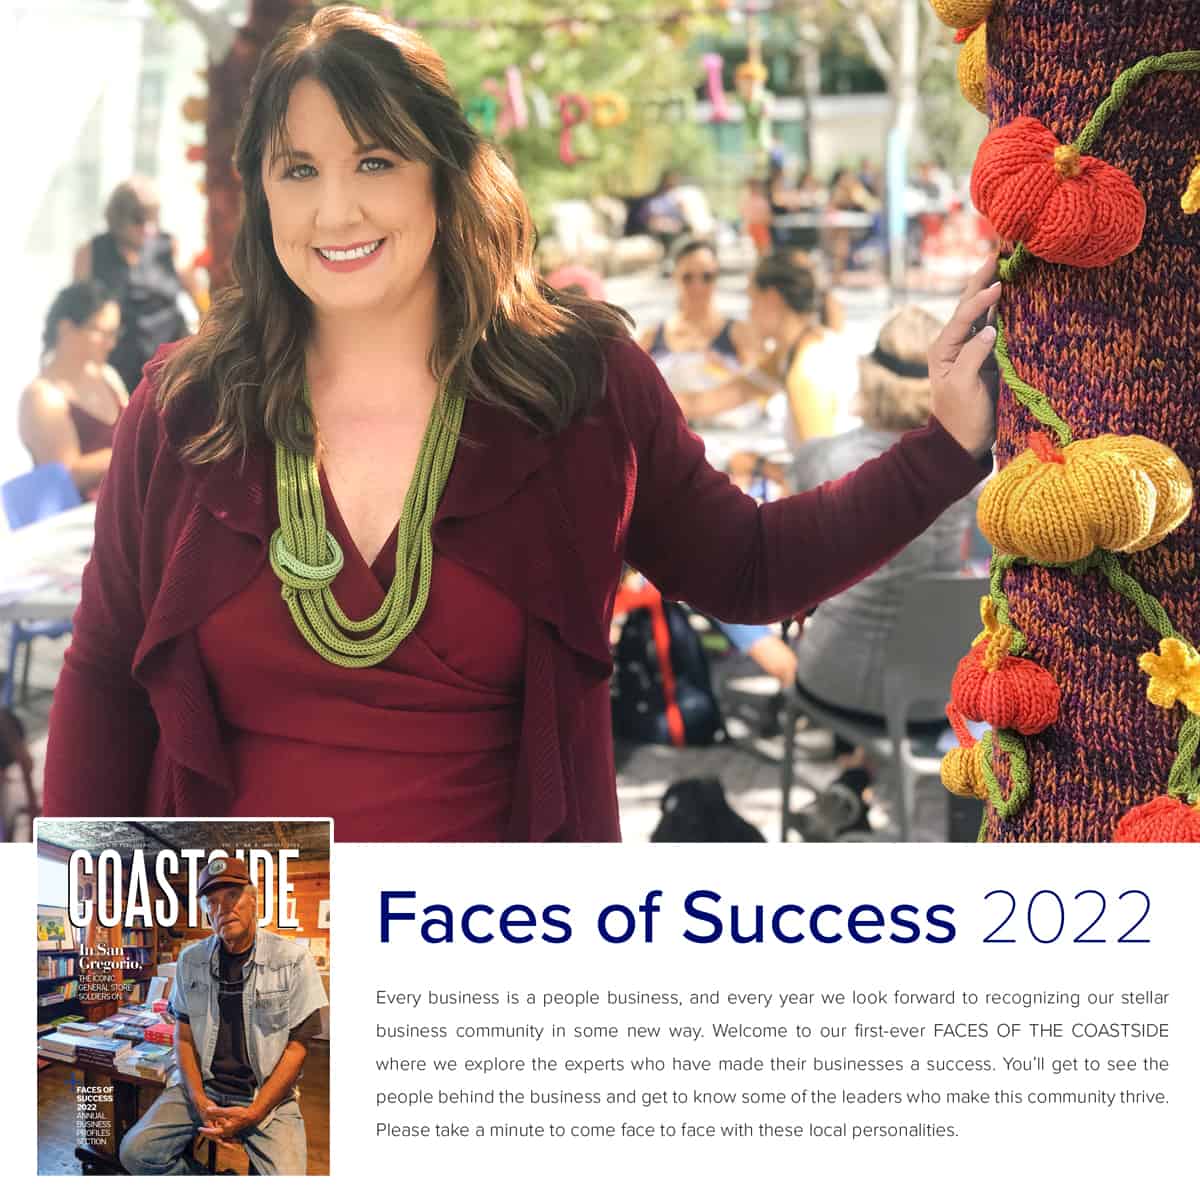 Kristen McDonnell in Faces of Success 2022 issue of Coastside magazine.